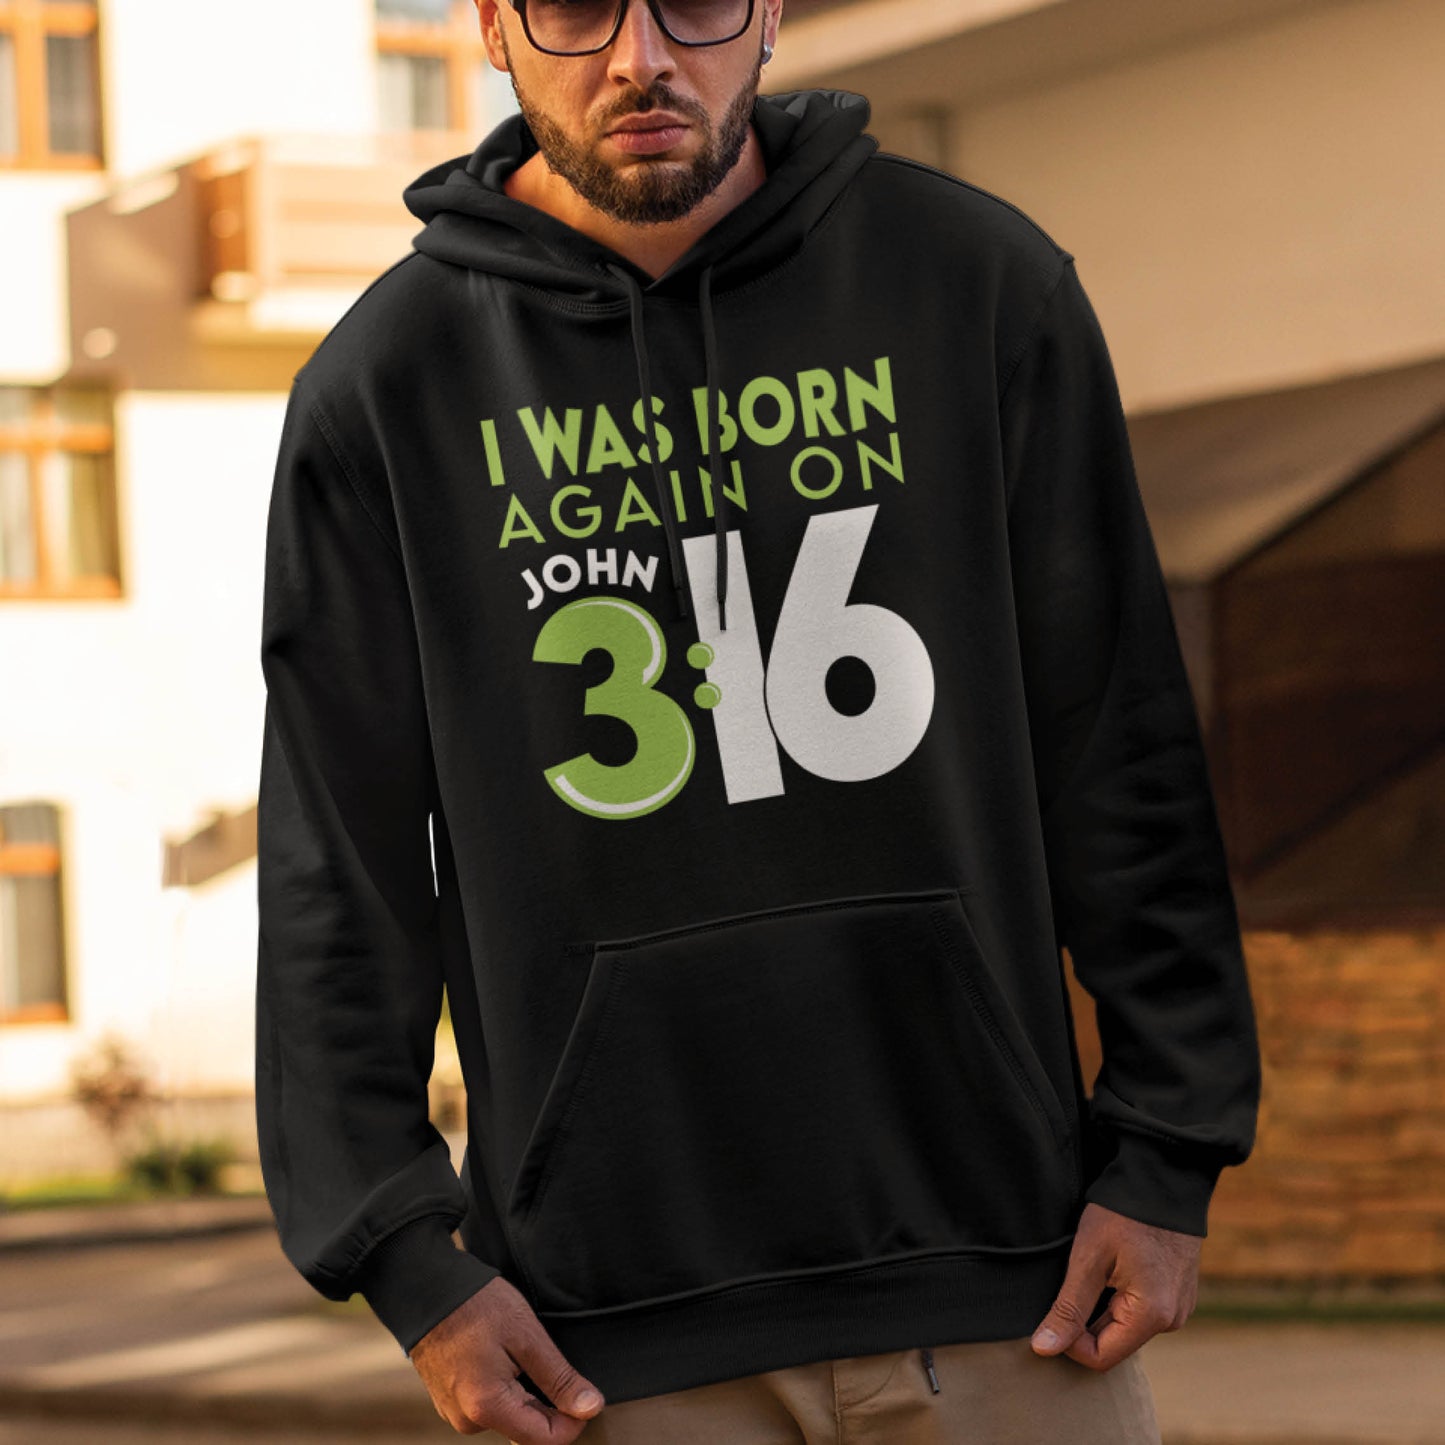 Trendy man wearing a Black Unisex Cozy Hoodie with Christian aesthetic bible verse message that says, "I Was Born Again On John 3:16" bible verse quote in lime green and white for men and women